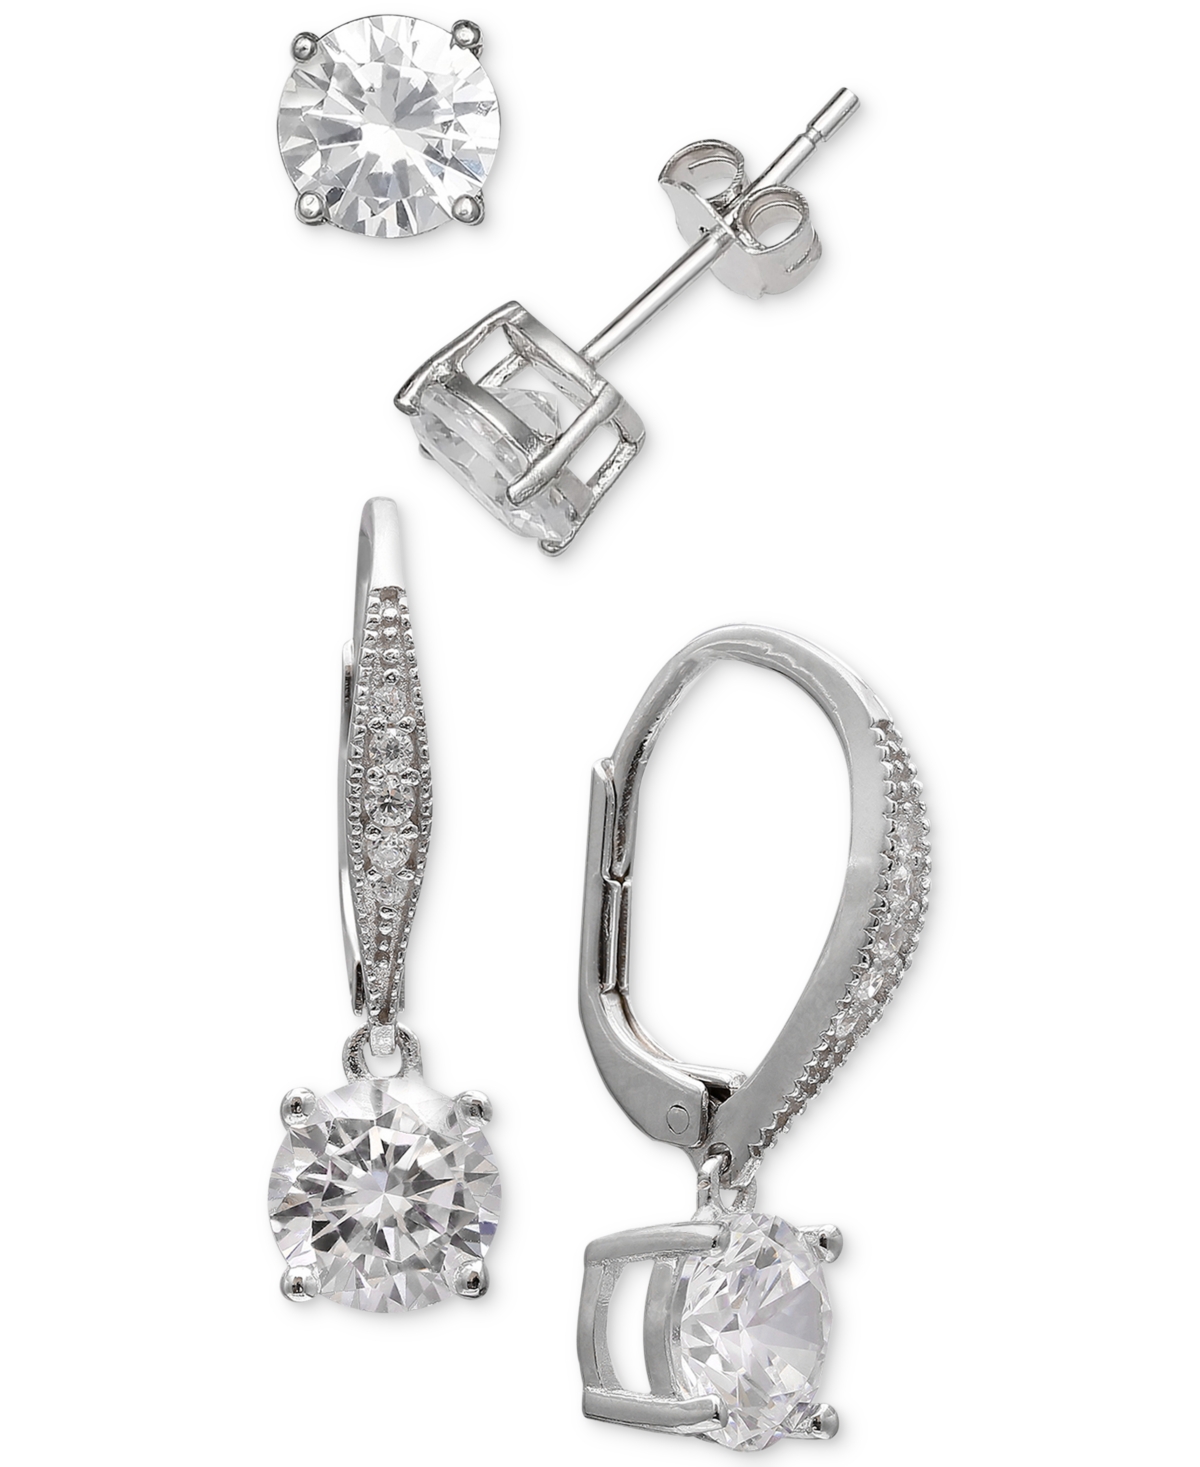 2-Pc. Cubic Zirconia Earring Set in Sterling Silver, Created for Macy's - Silver